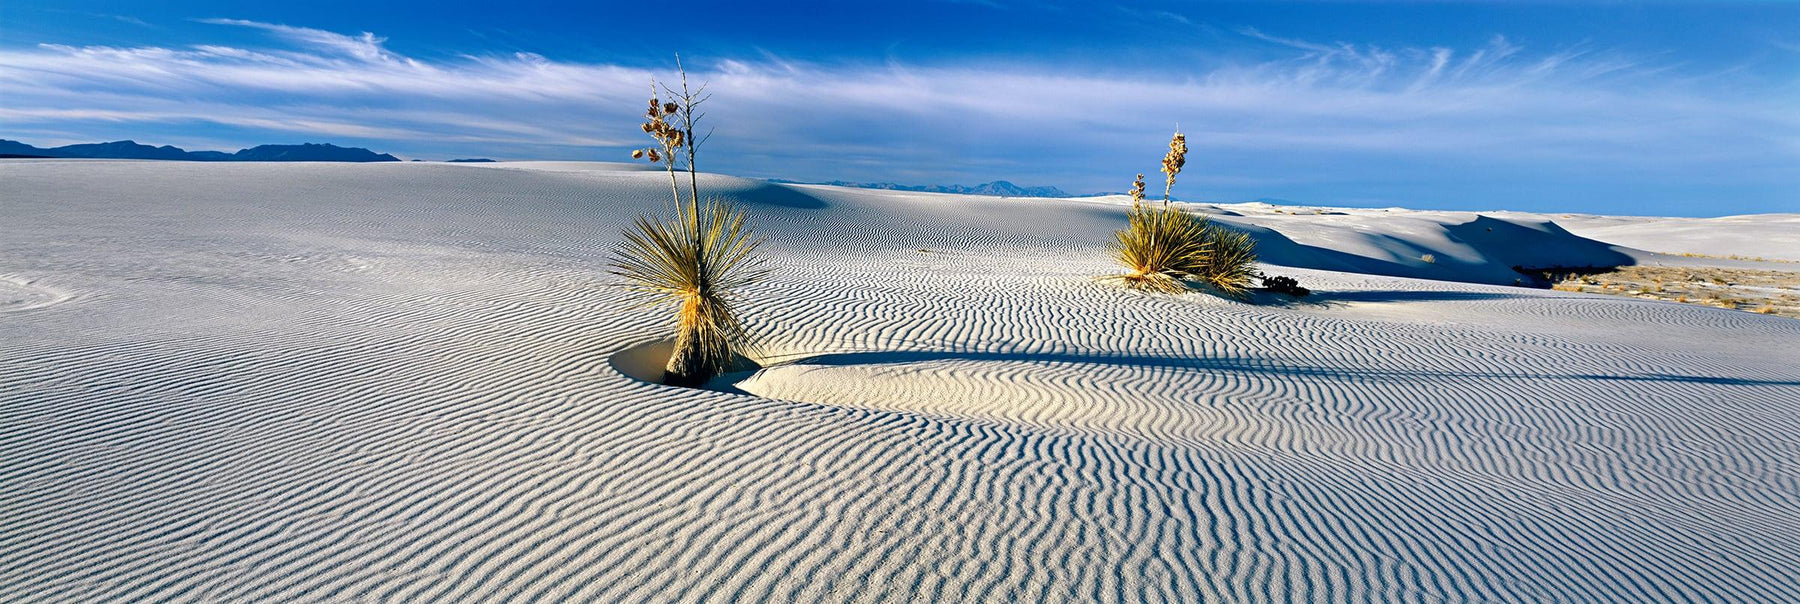 Two Yucca plants growing in the windswept  sand dunes of White Sand Dunes National Monument New Mexico